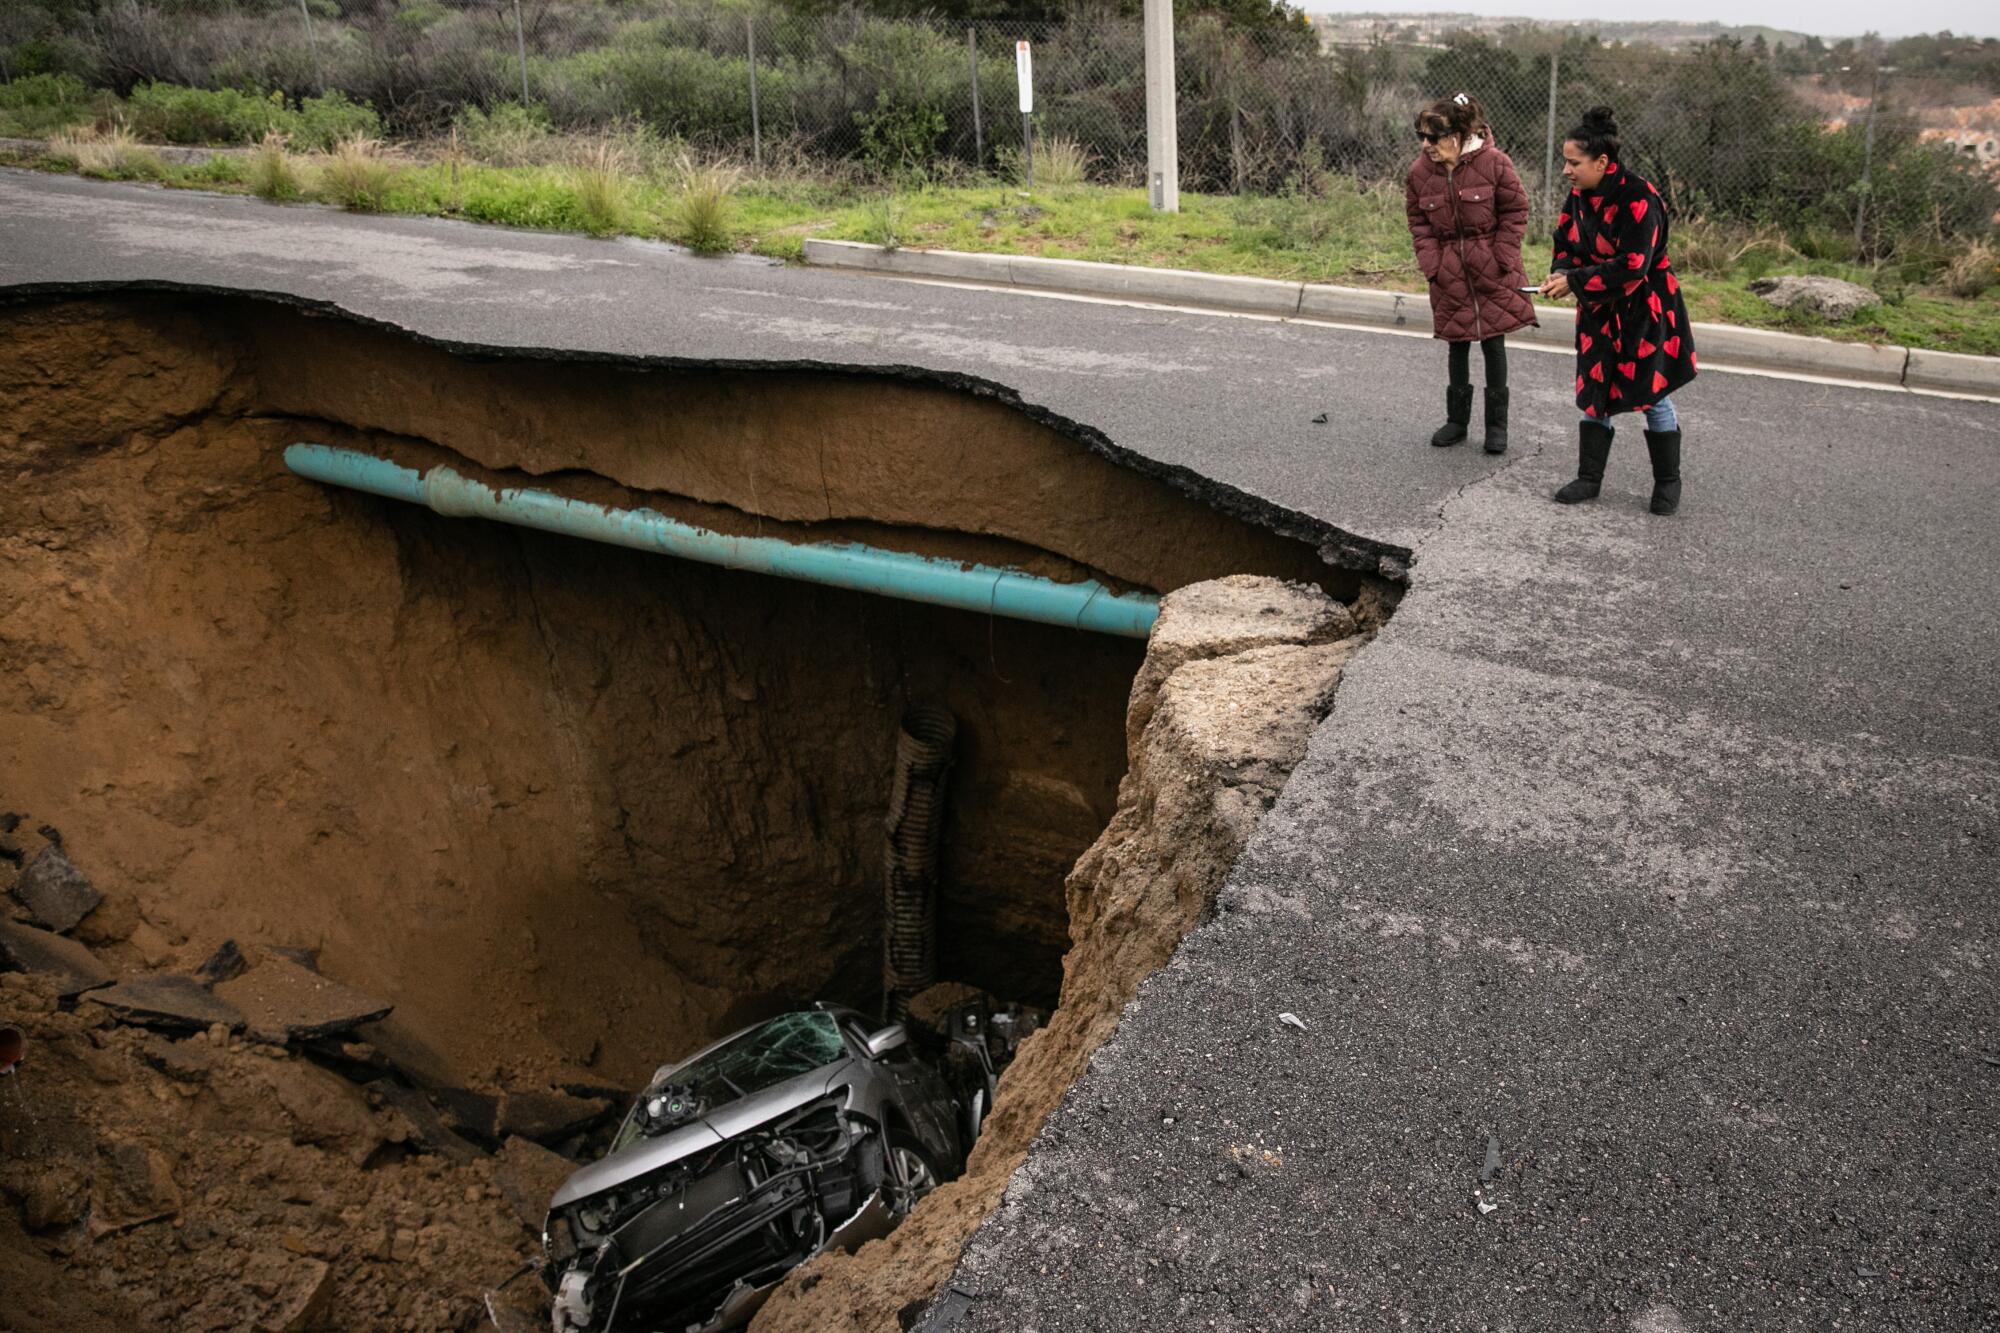 Two Chatsworth residents view the sinkhole that swallowed two cars on Iverson Road south of Zaltana Street